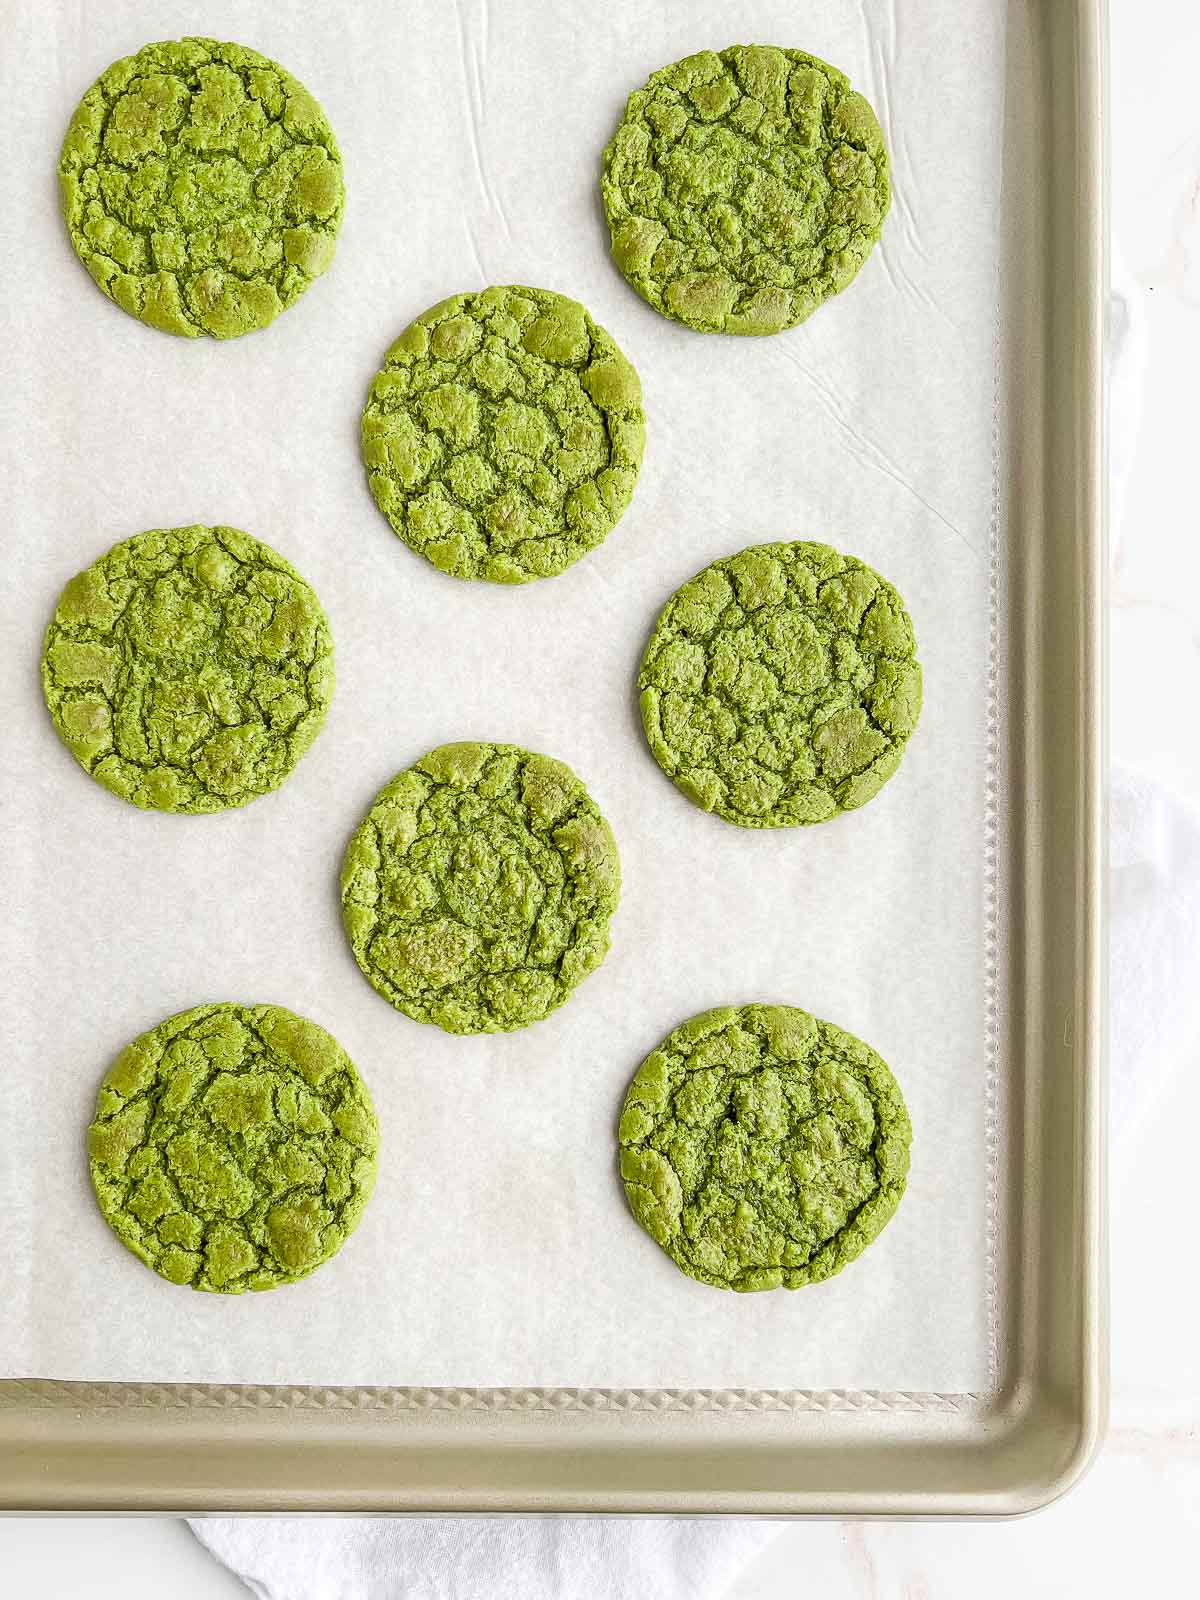 Lined baking tray of matcha cookies.